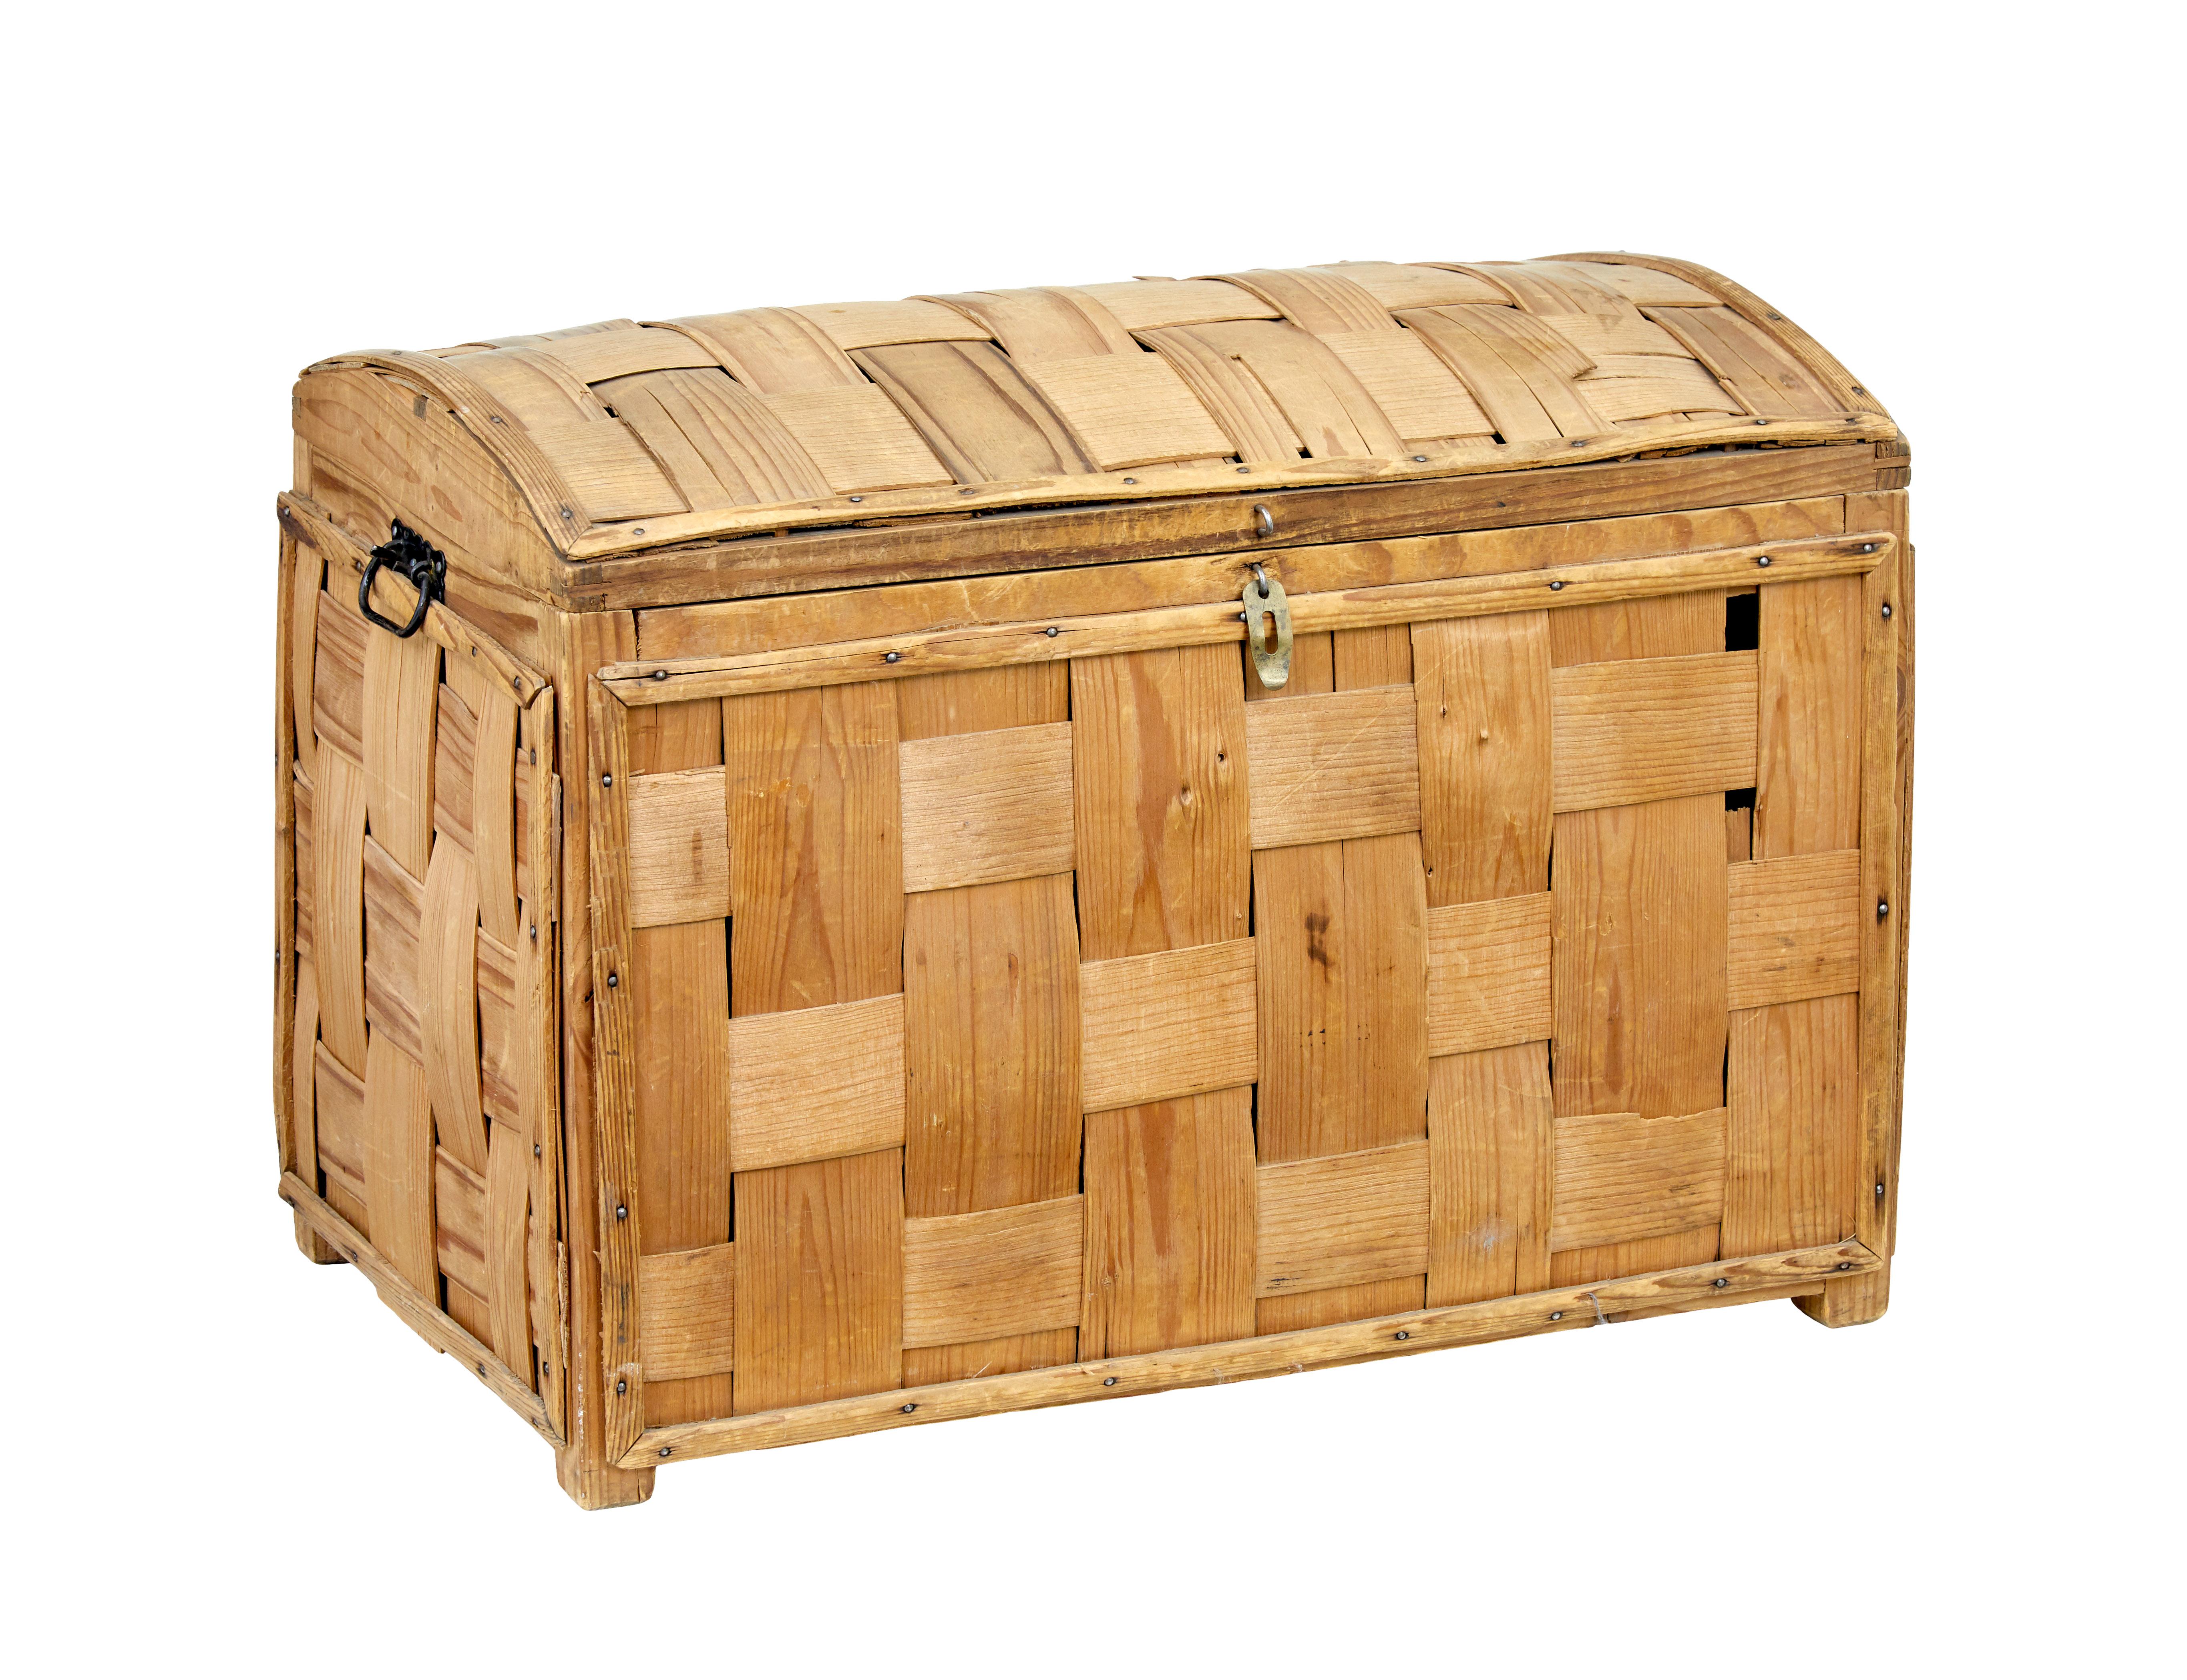 Late 19th century Scandinavian woven pine dome top trunk circa 1890.

Traditional hand made Swedish dome top chest, made from weaving strips of pine, held in place by a pine frame.  Practical piece ready for everyday use.

Top with latch, carrying